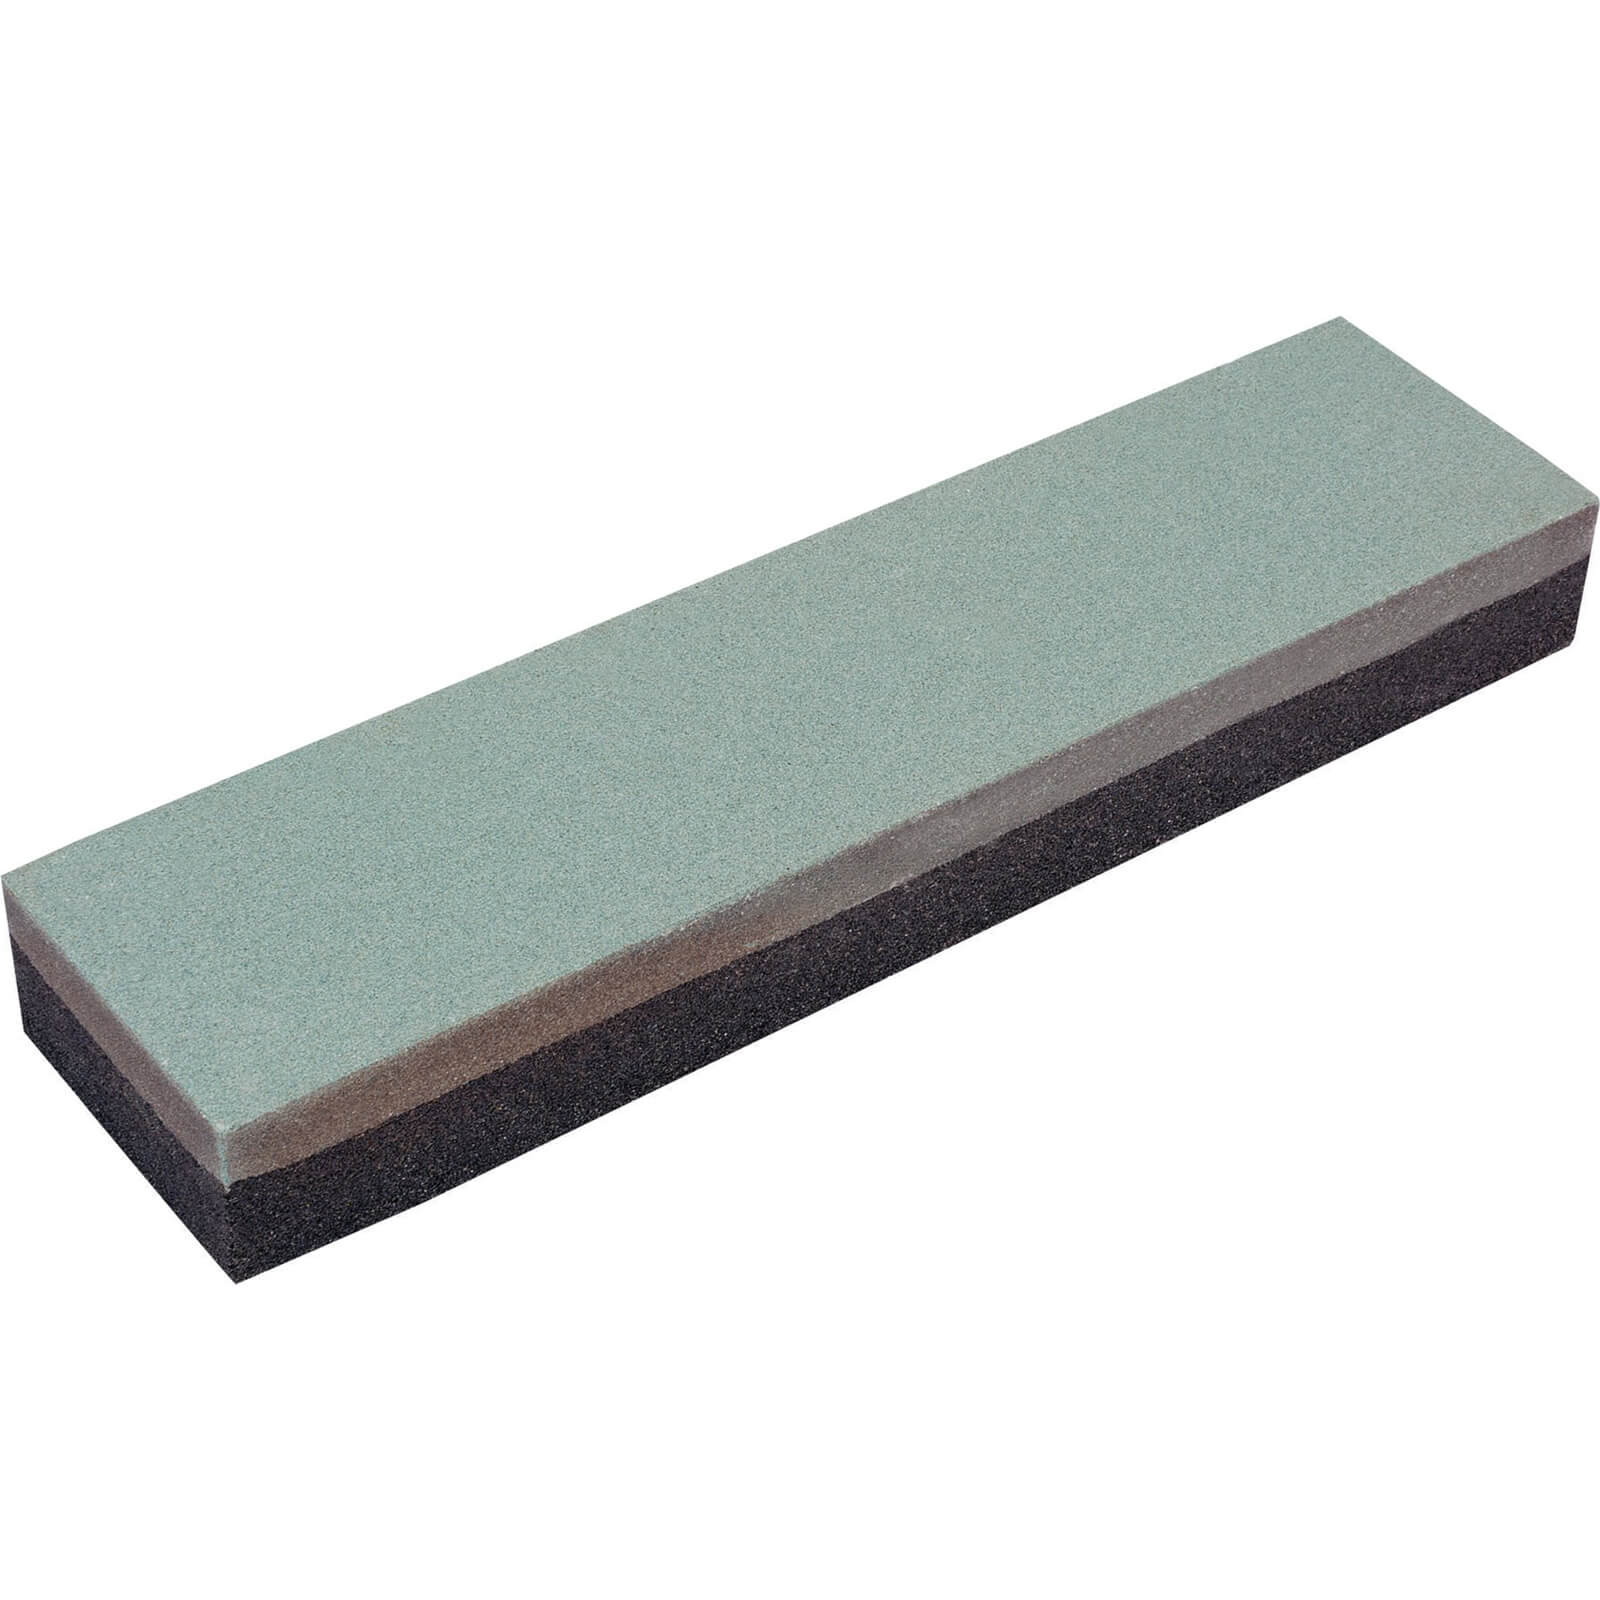 Image of Draper Silicone Carbide Sharpening Stone 200mm 50mm 25mm